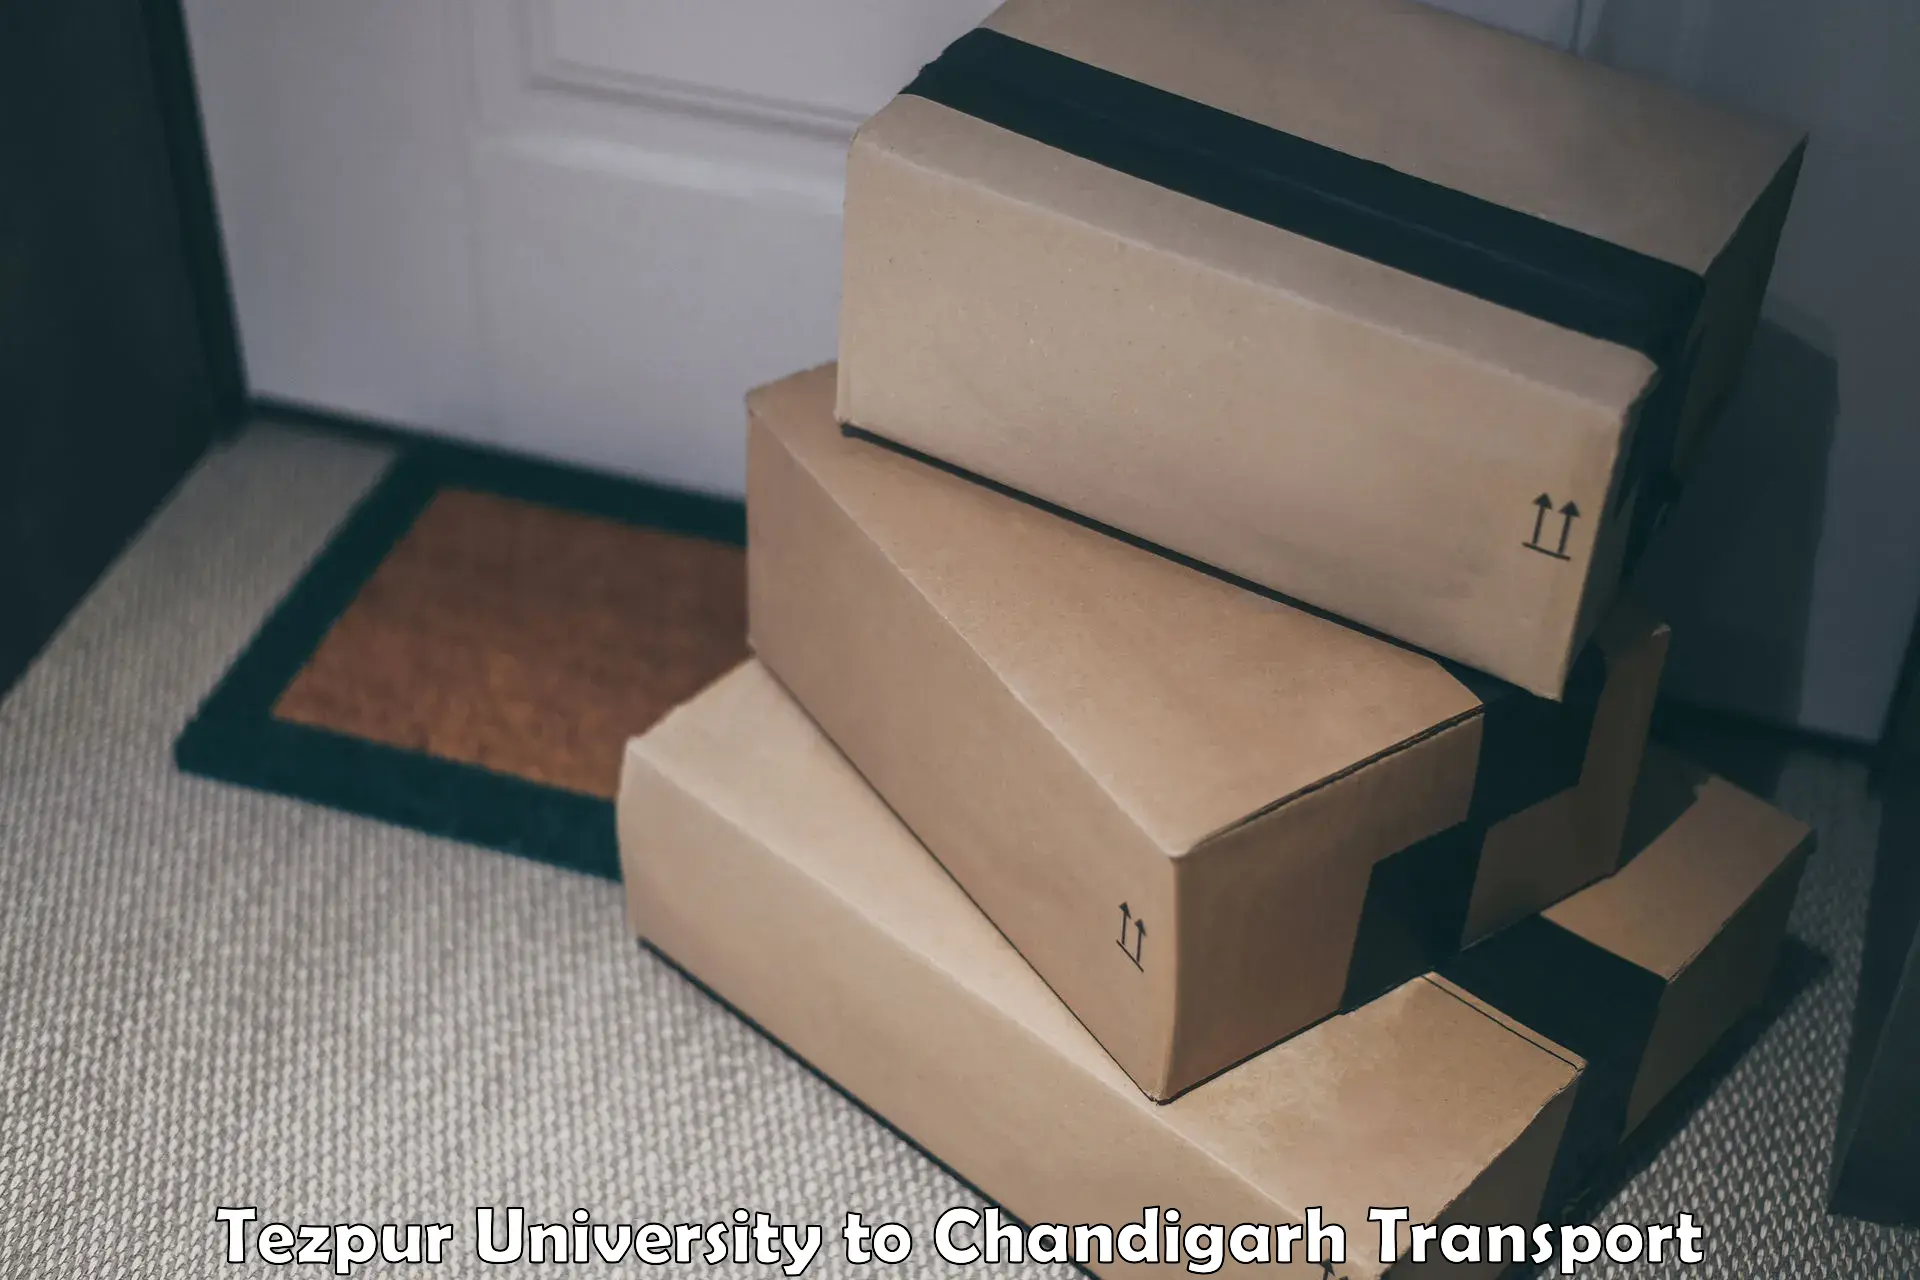 Best transport services in India Tezpur University to Chandigarh